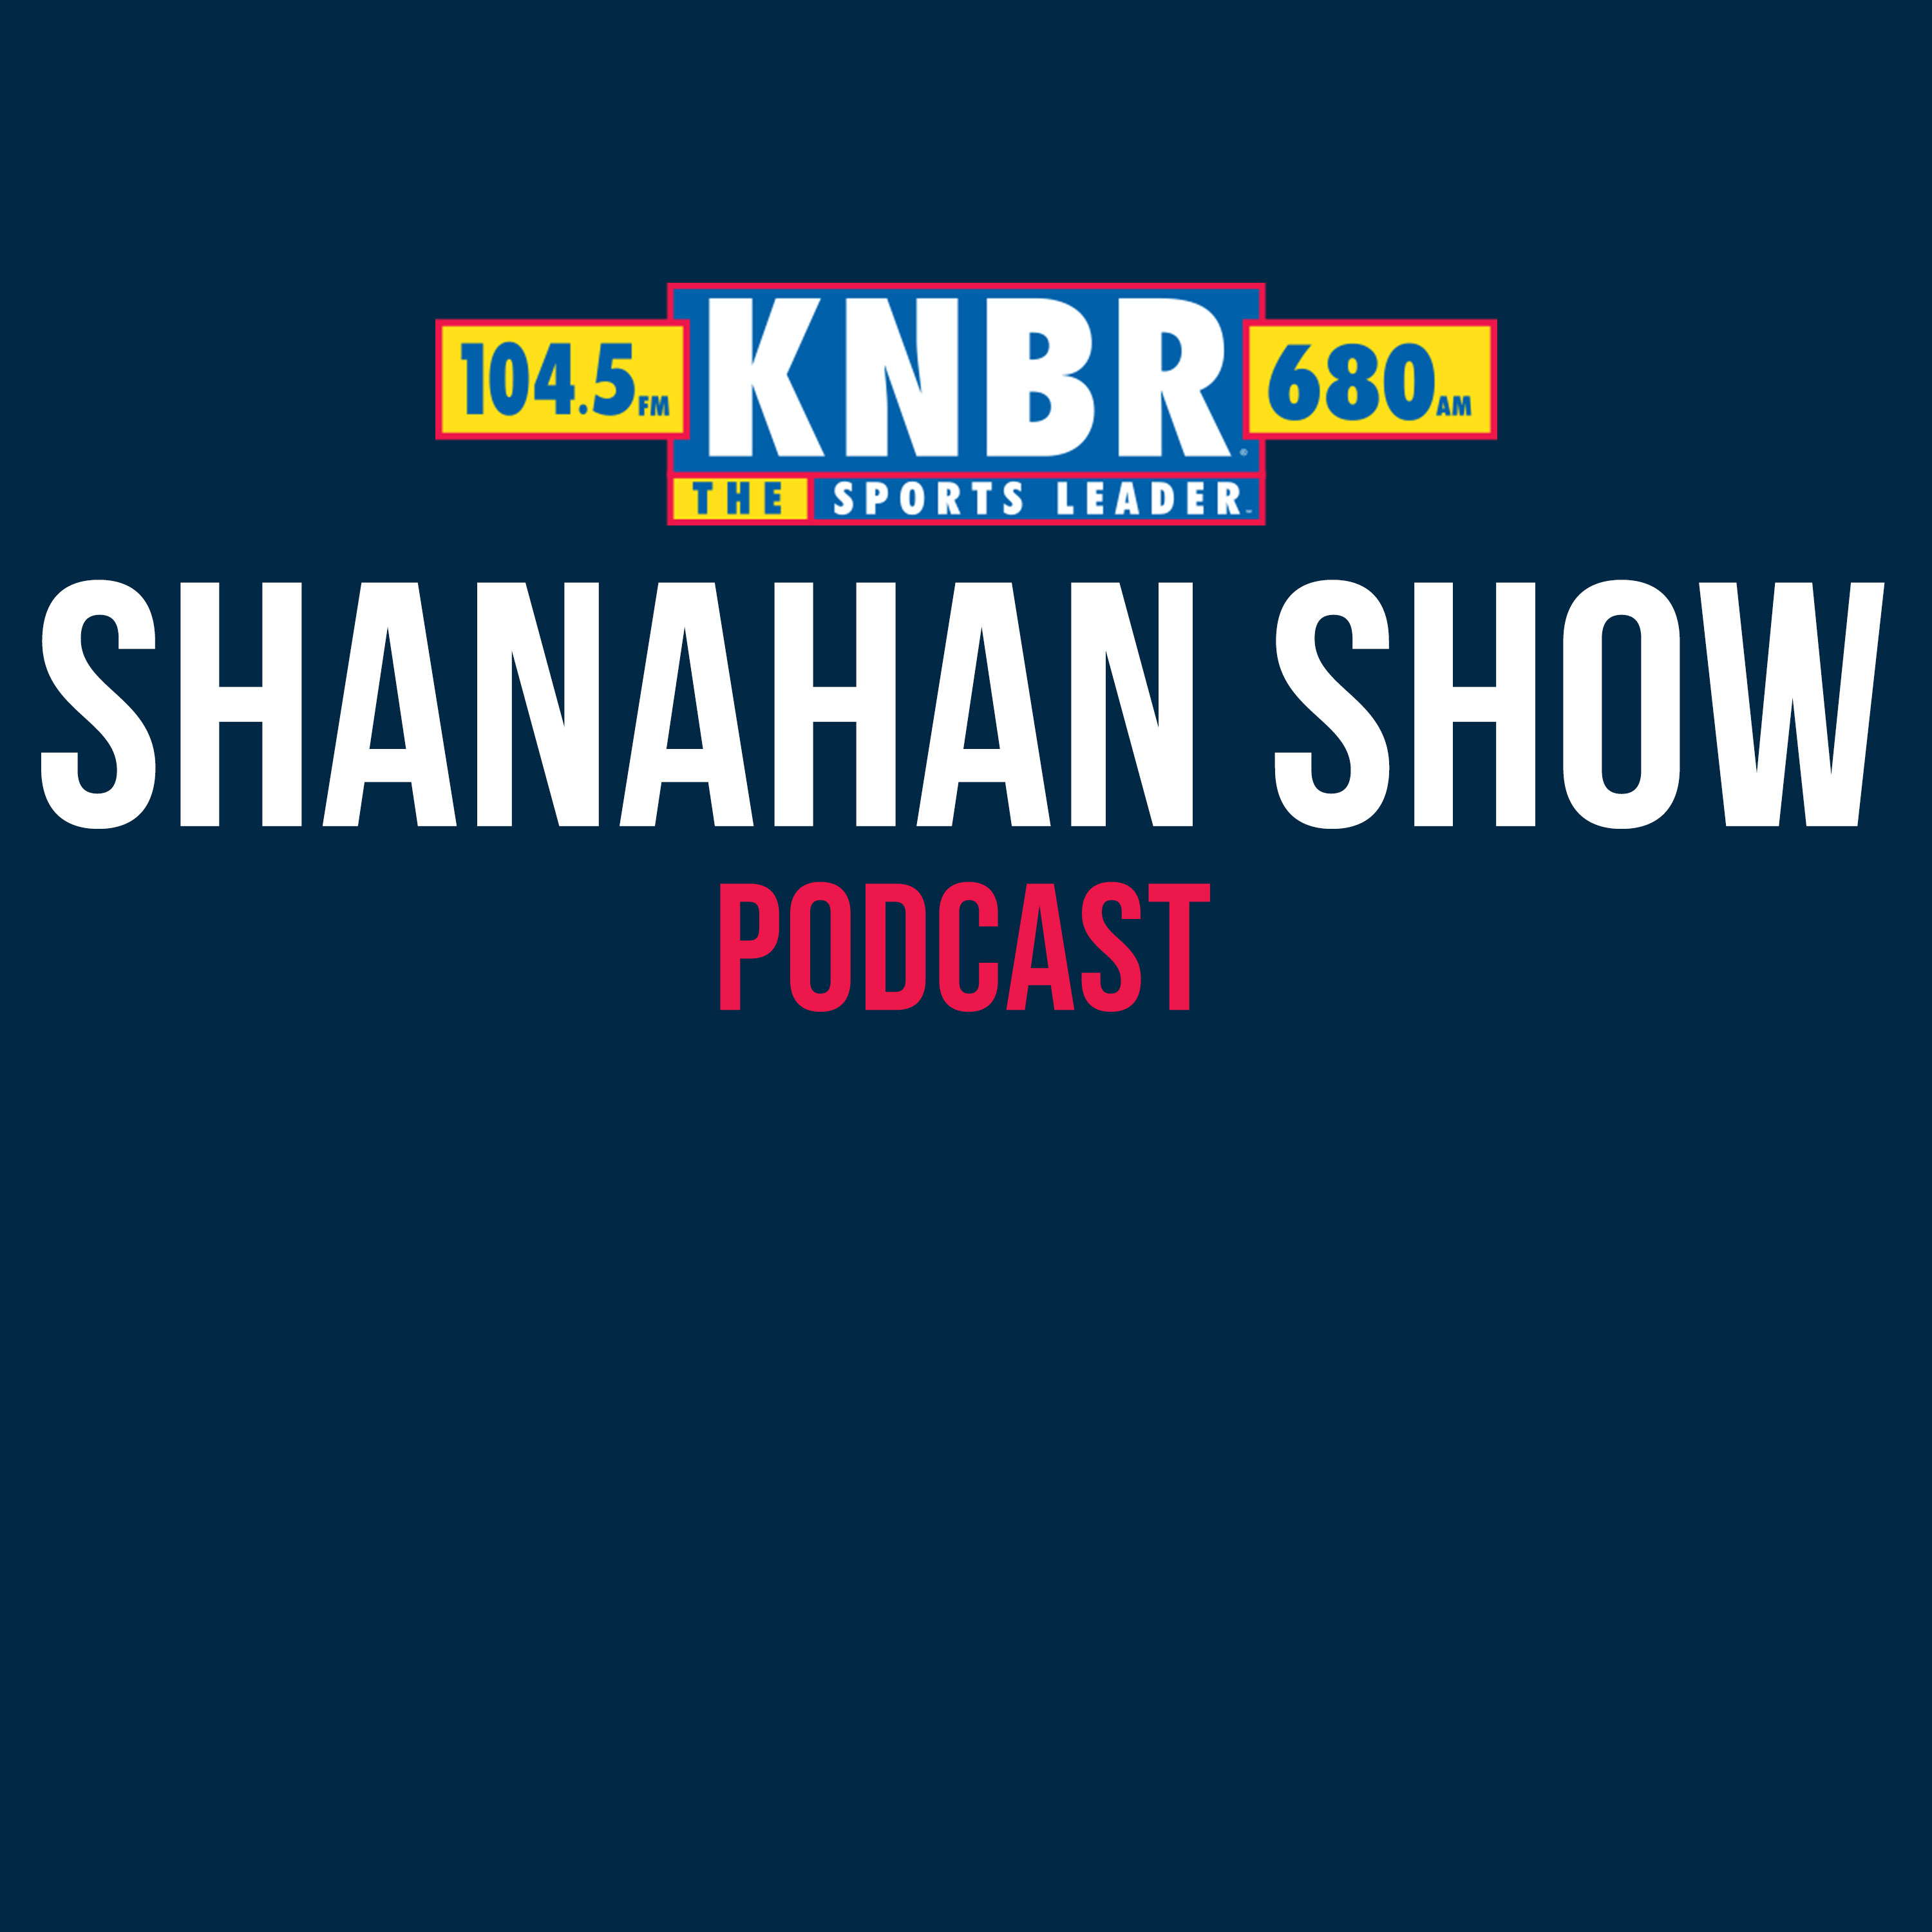 1-4 Kyle Shanahan joins Tolbert & Copes to discuss getting the #1 seed in the NFC playoffs